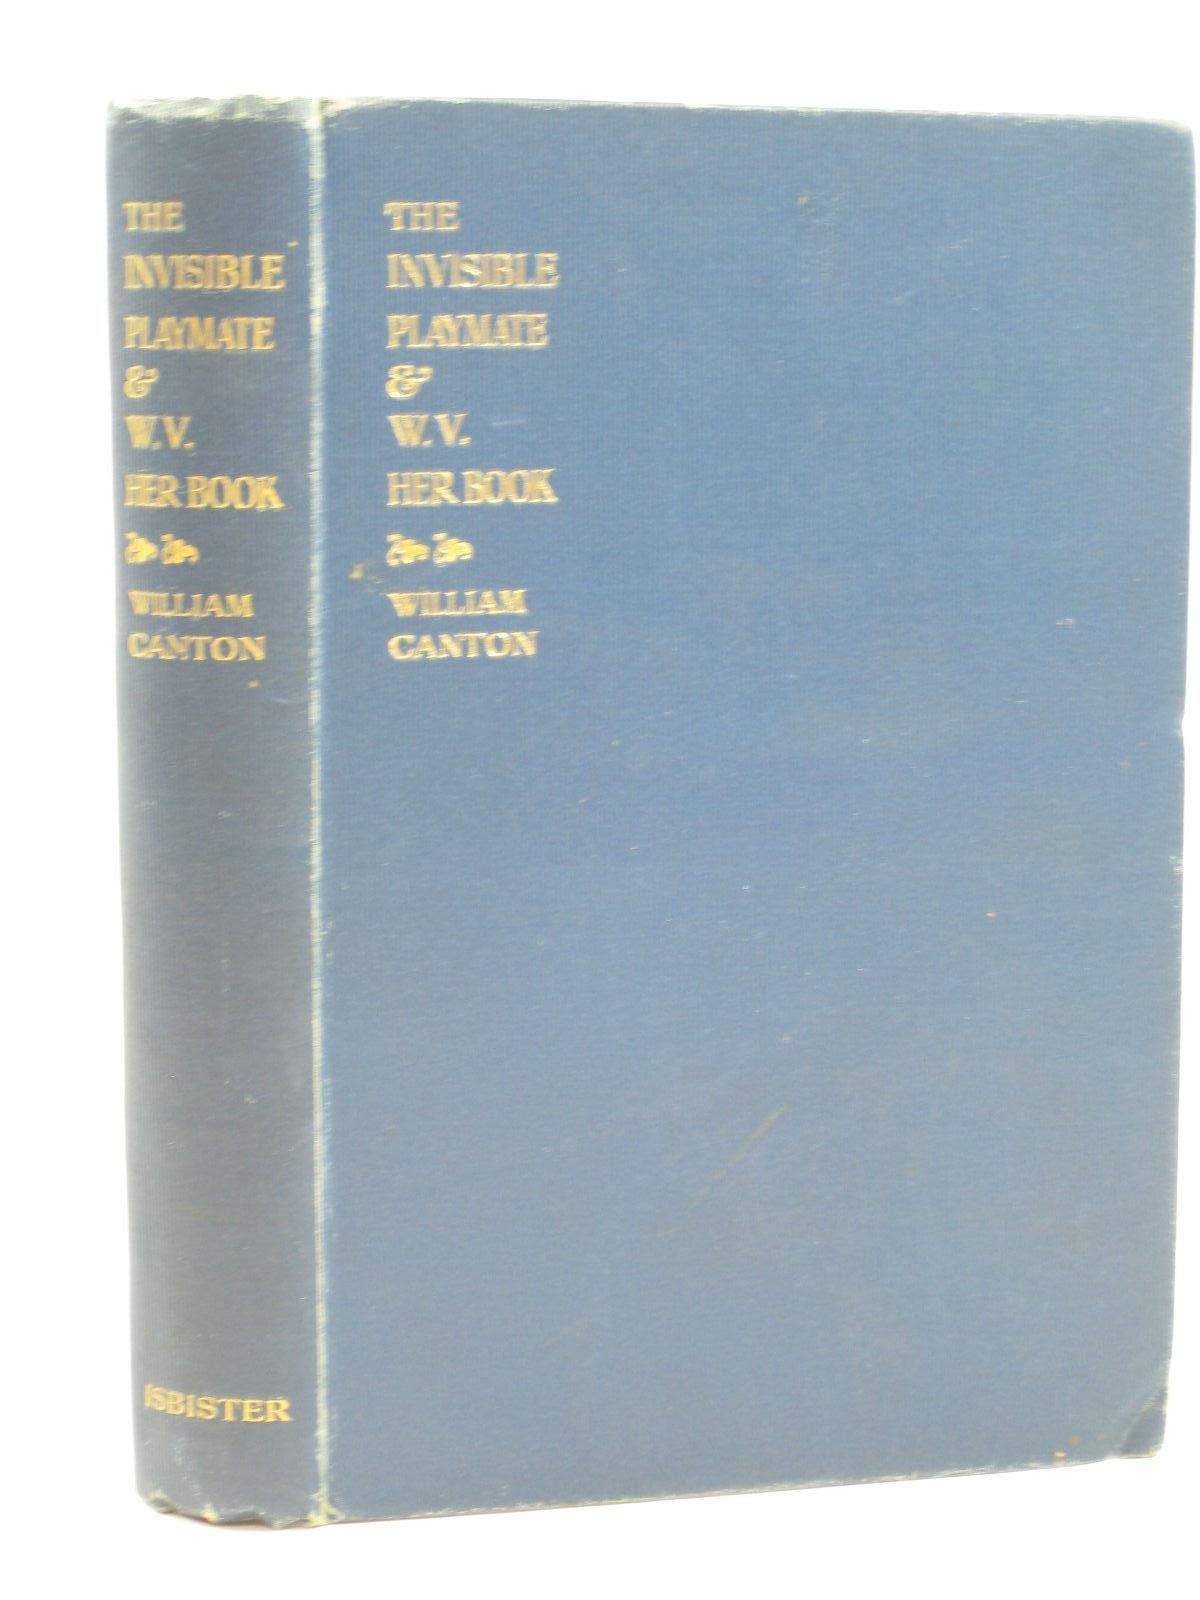 Photo of THE INVISIBLE PLAYMATE & W. V. HER BOOK written by Canton, William illustrated by Brock, C.E. published by Isbister & Co. Ltd. (STOCK CODE: 1406378)  for sale by Stella & Rose's Books